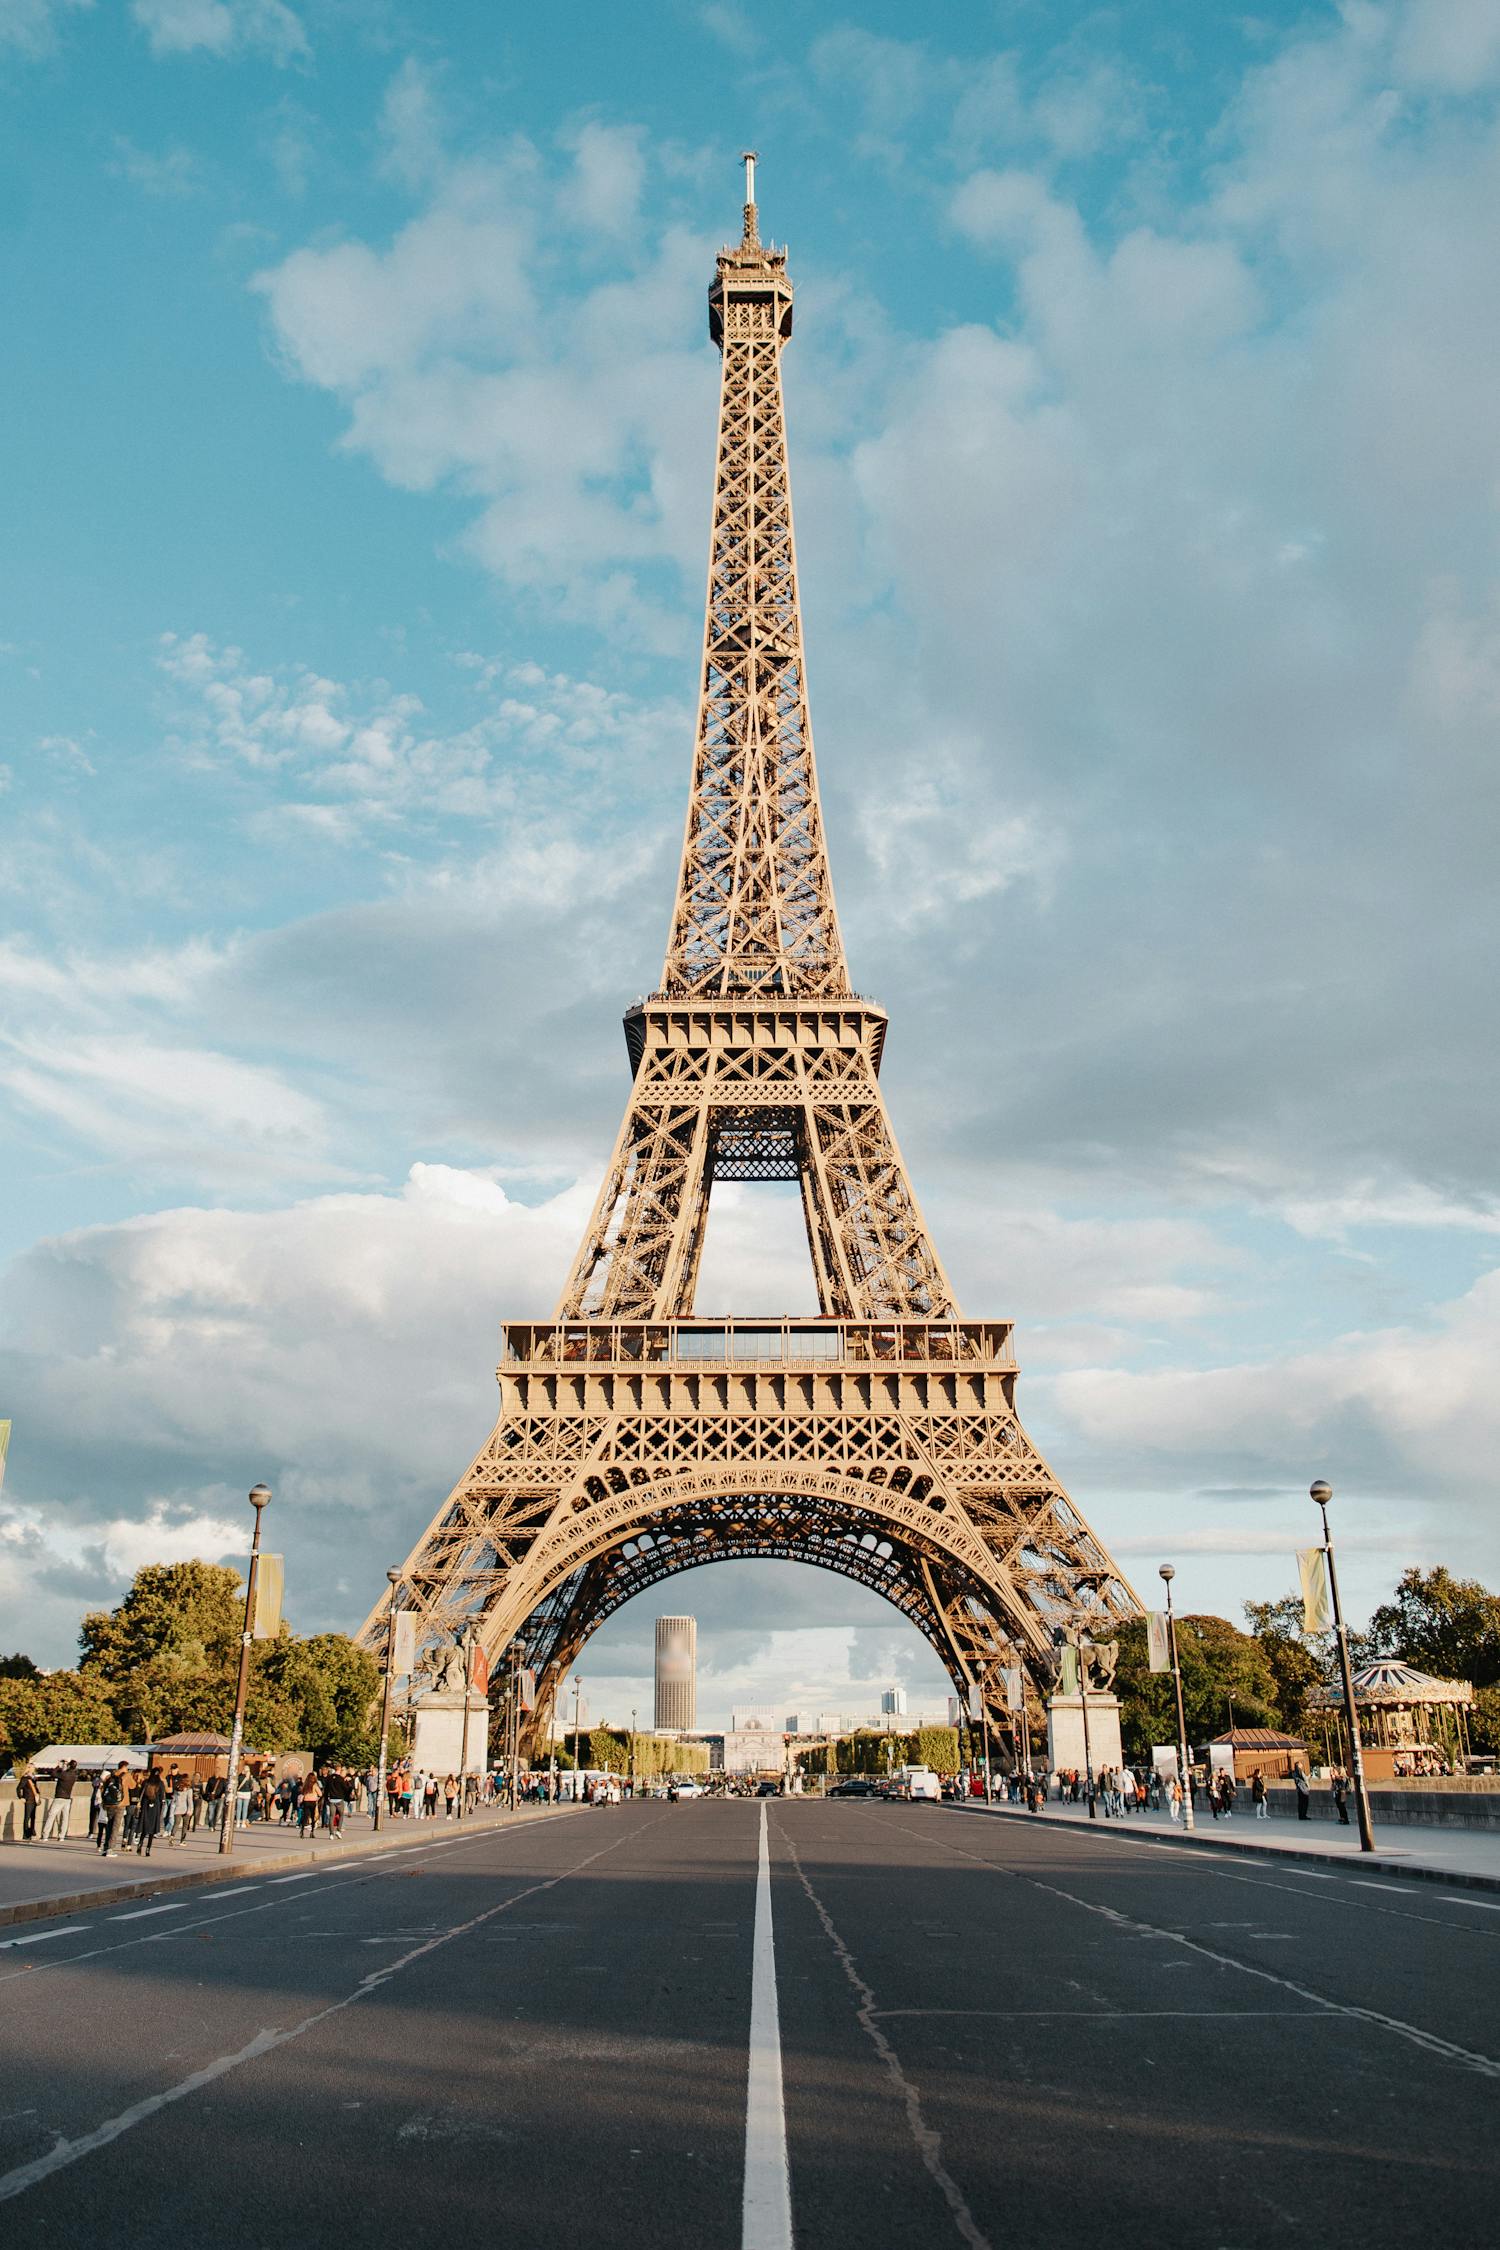 The Eiffel Tower In Full Shot Photography · Free Stock Photo